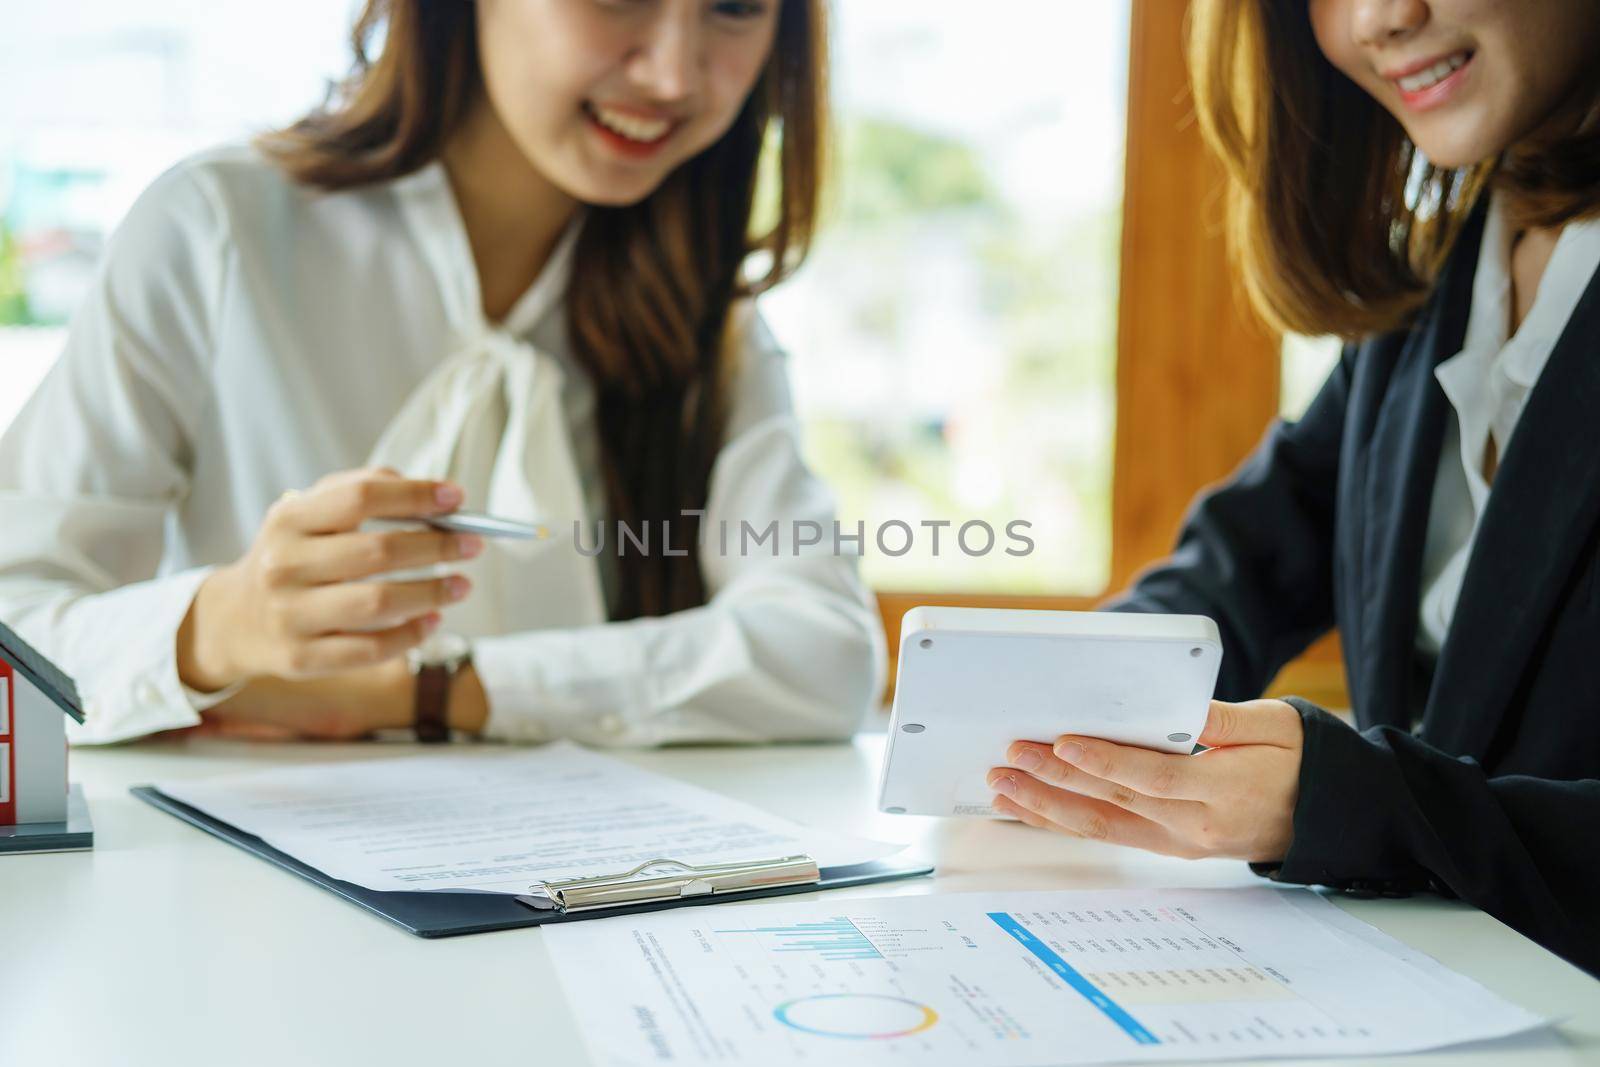 Guarantee, mortgage, contract, contract, signed, real estate agent or bank officer holding a calculator, submits a bid with a customer to buy a home before signing to make a deal by Manastrong